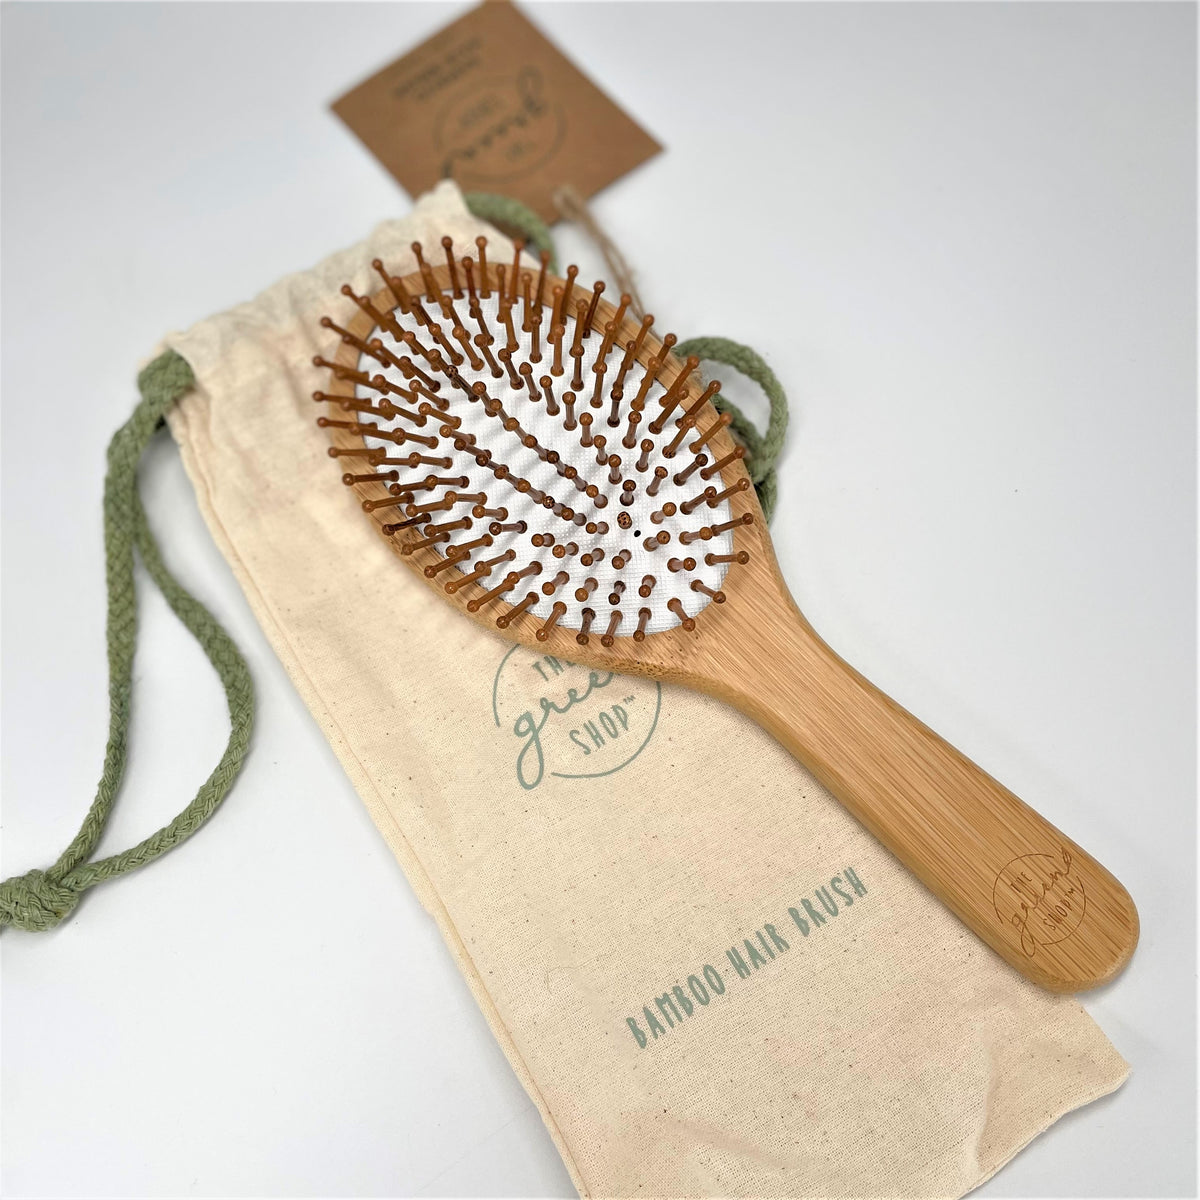 The Caswell-Massey Ultimate Hair Brush Guide